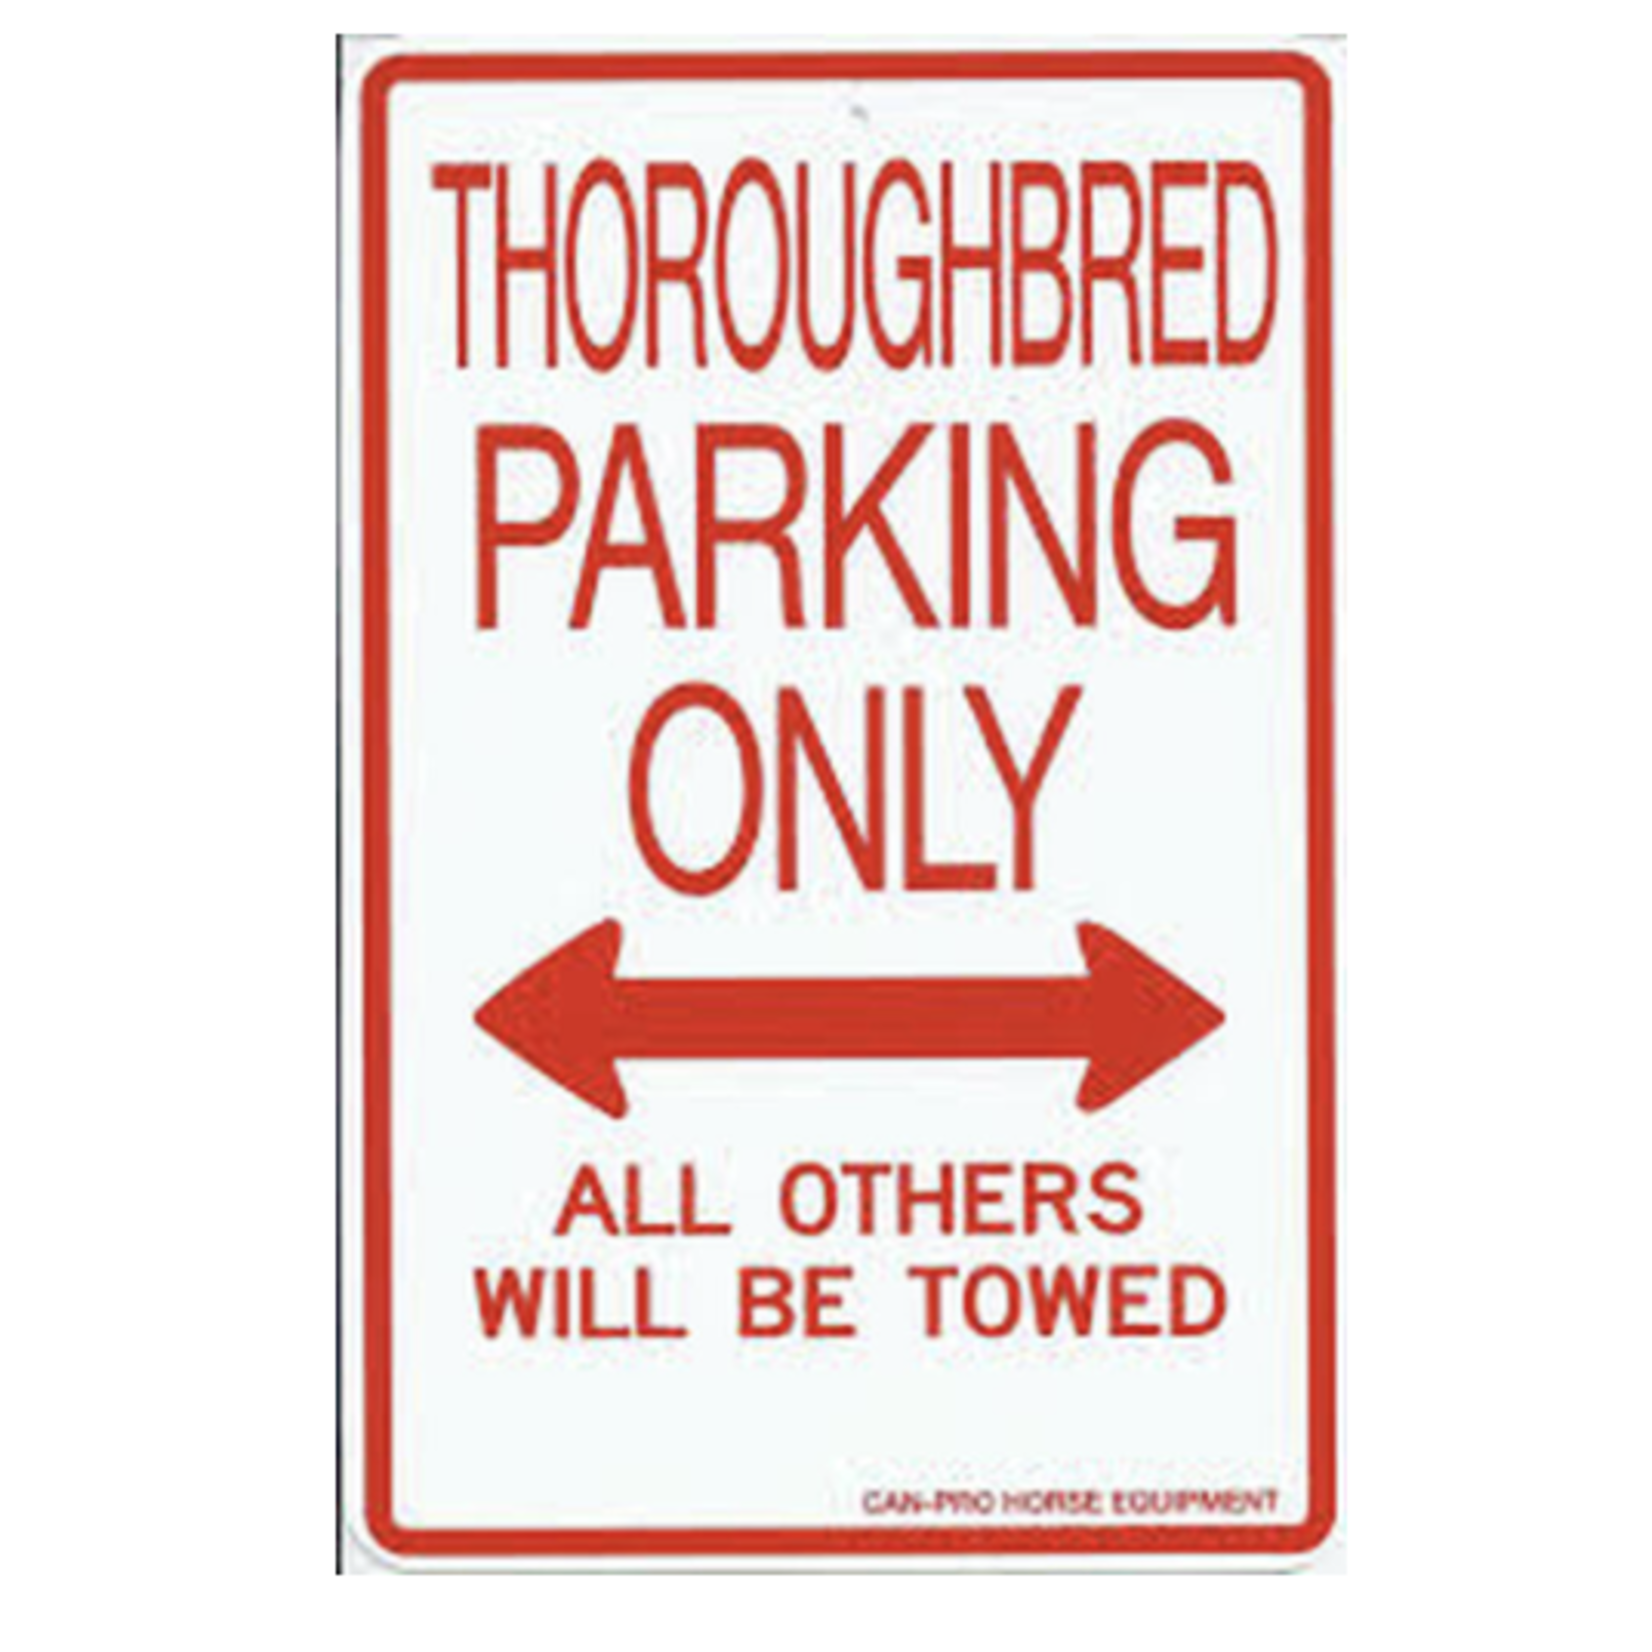 Can-Pro Plastic Parking Signs